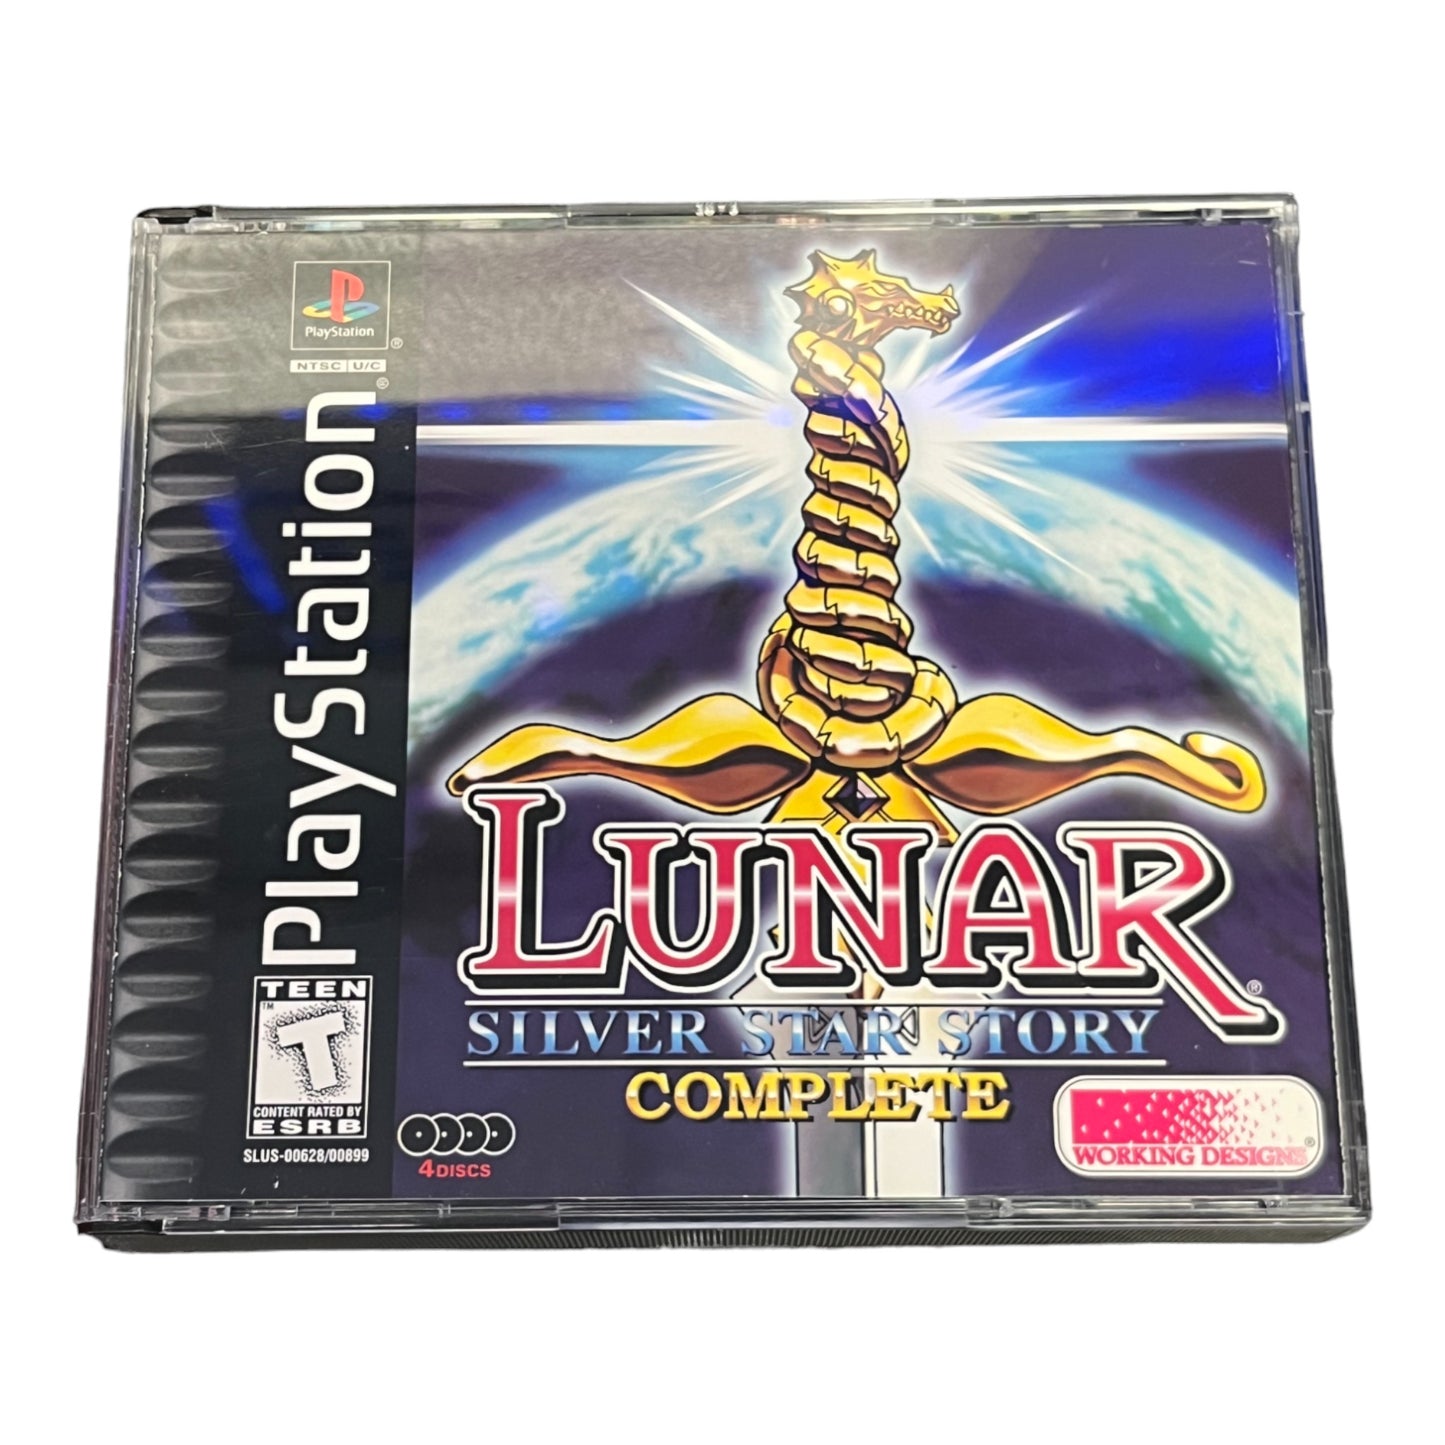 Lunar Silver Star Story Complete [4 Disc] Collector's Edition (PS1)